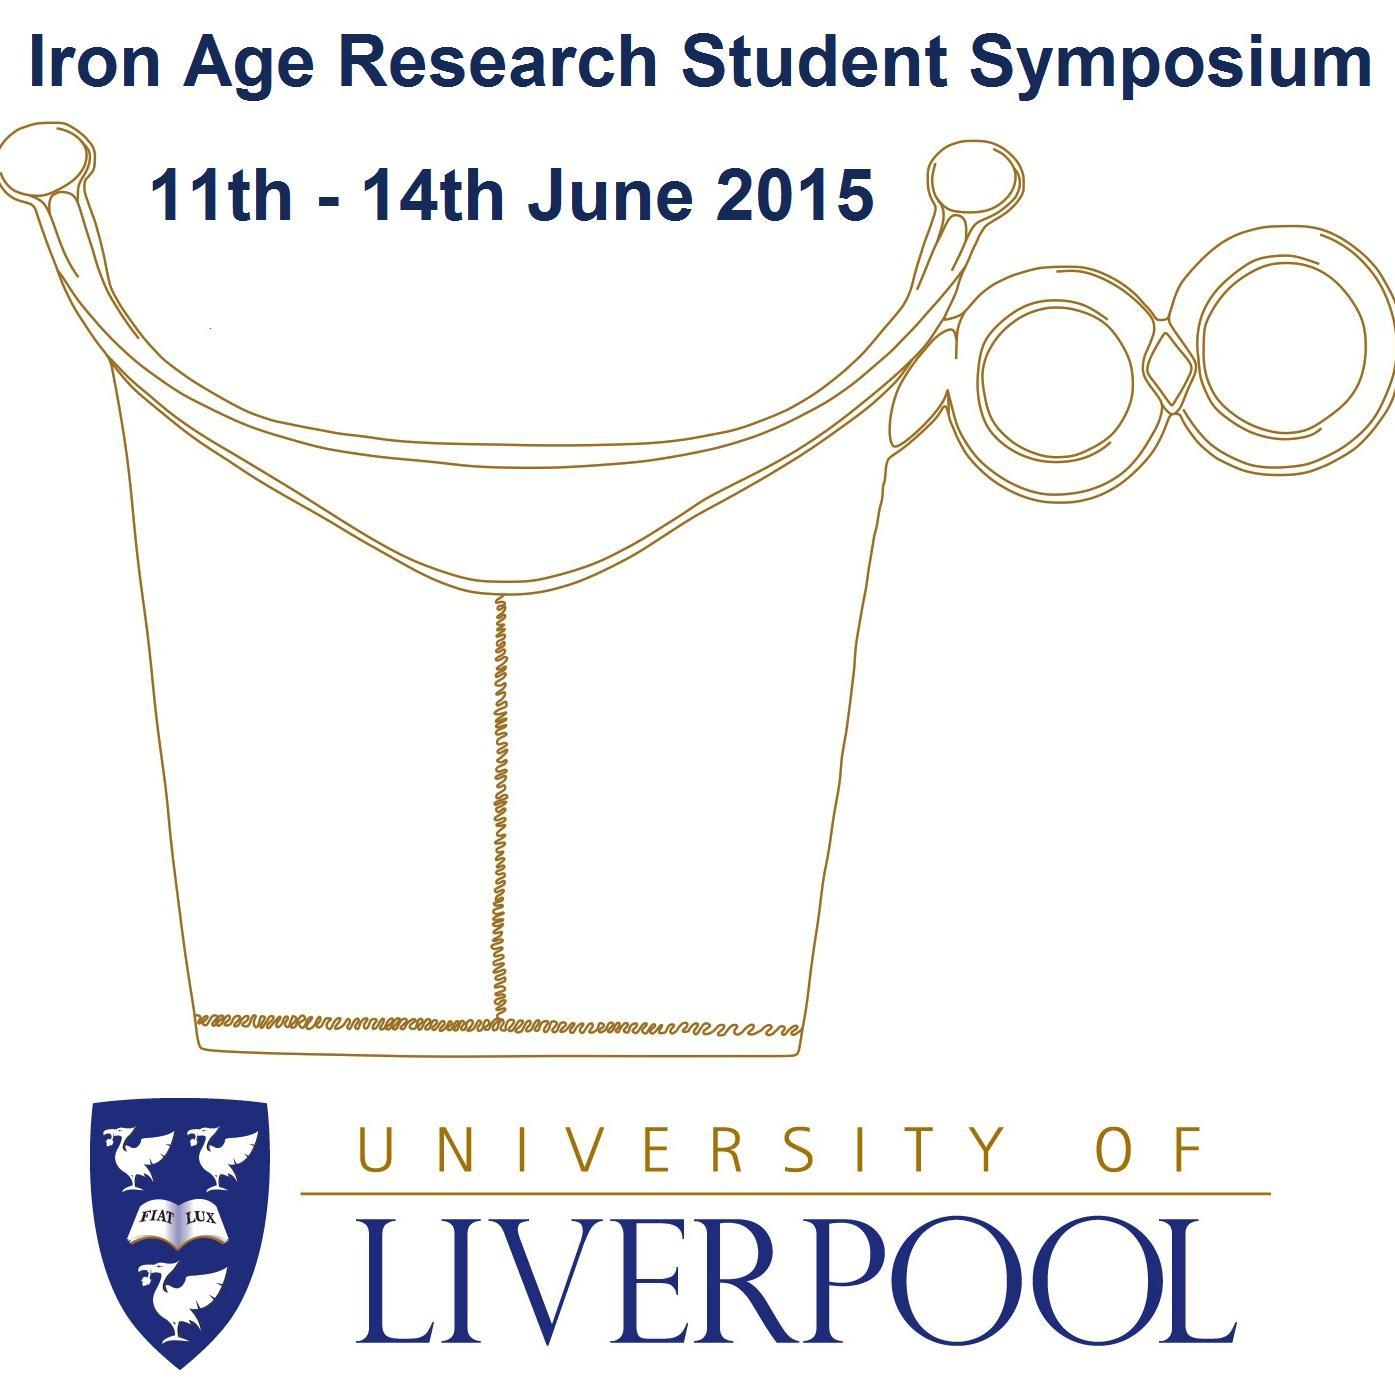 18th Iron Age Research Student Symposium | 11th - 14th June 2015